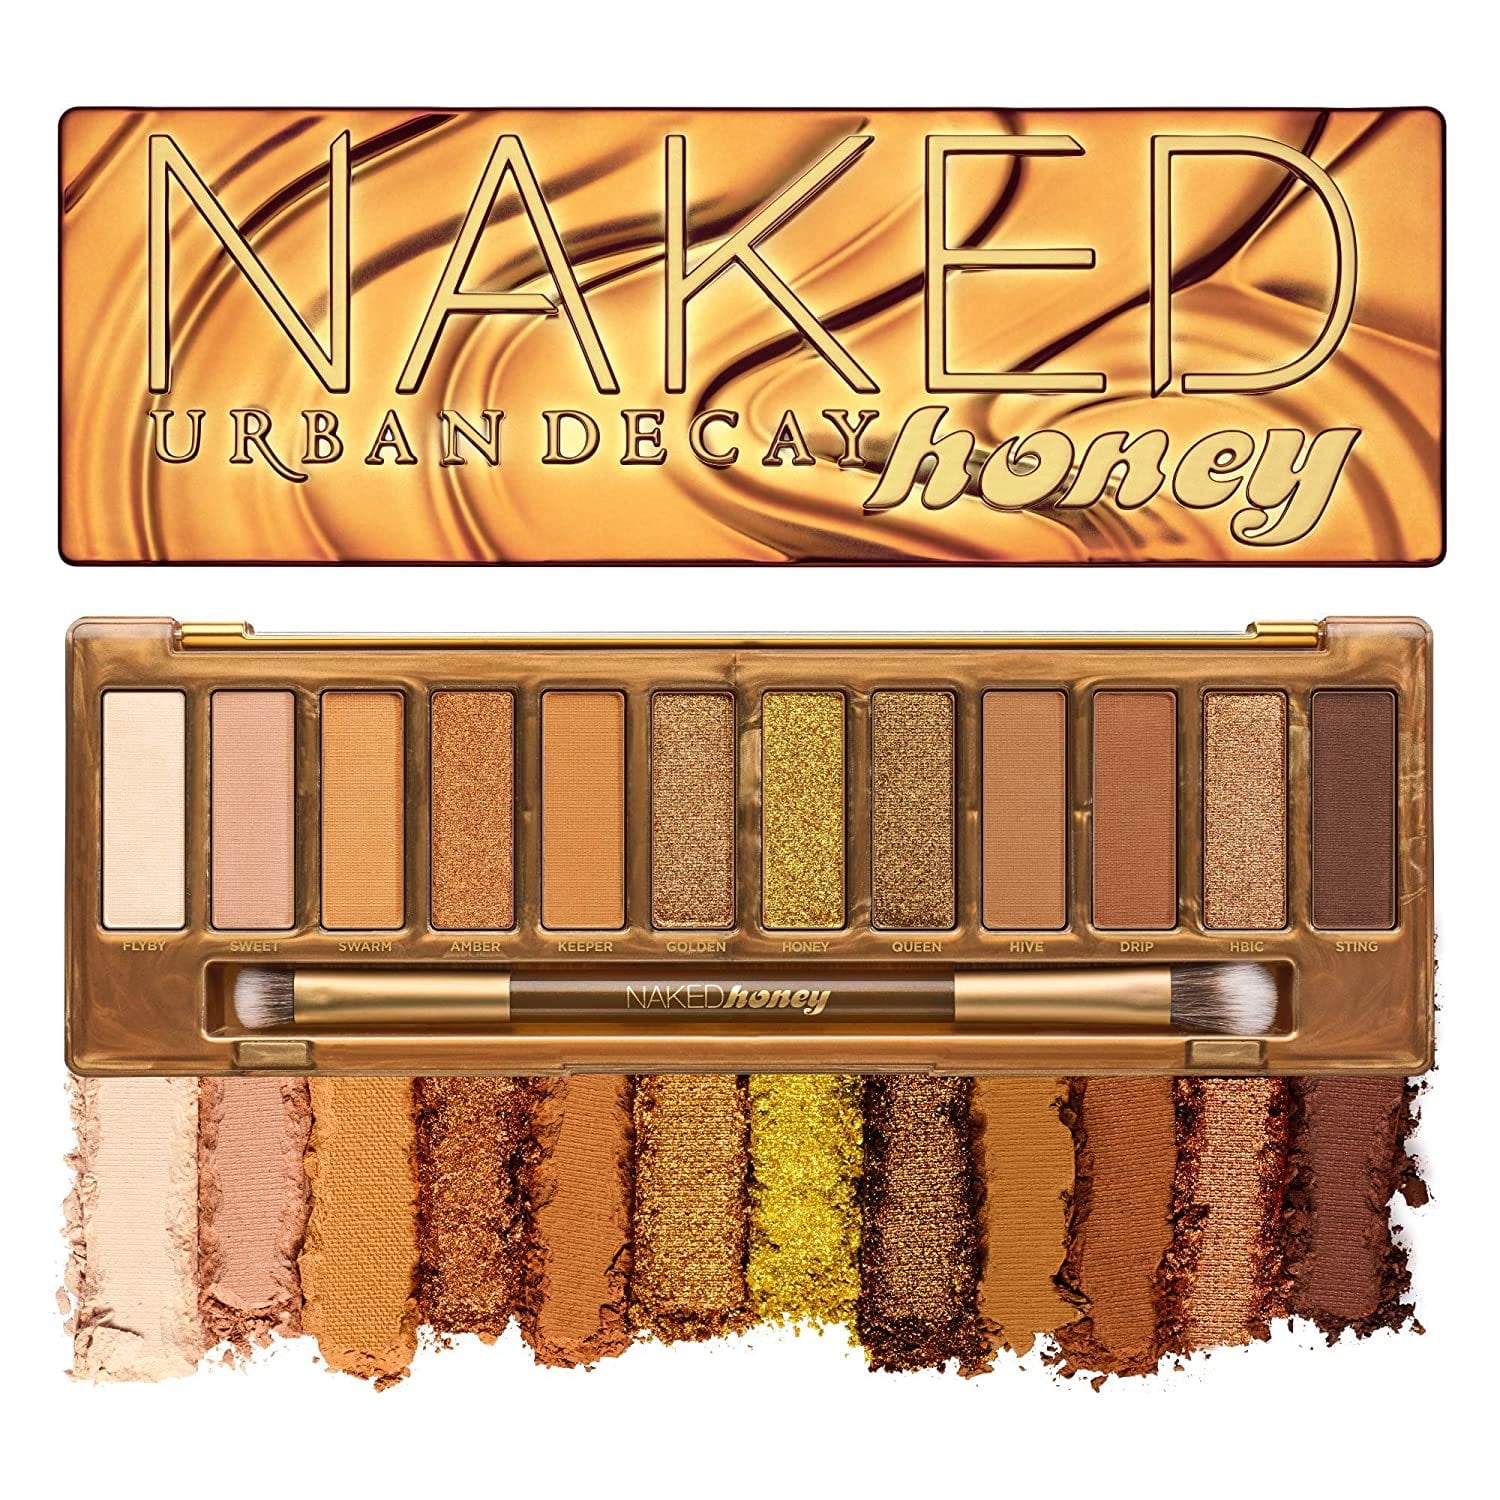 Urban Decay Naked Honey Eyeshadow Palette, 12 Golden Neutral - Rich Colors with Velvety Texture Set Includes Mirror & Double-Ended Makeup - Walmart.com